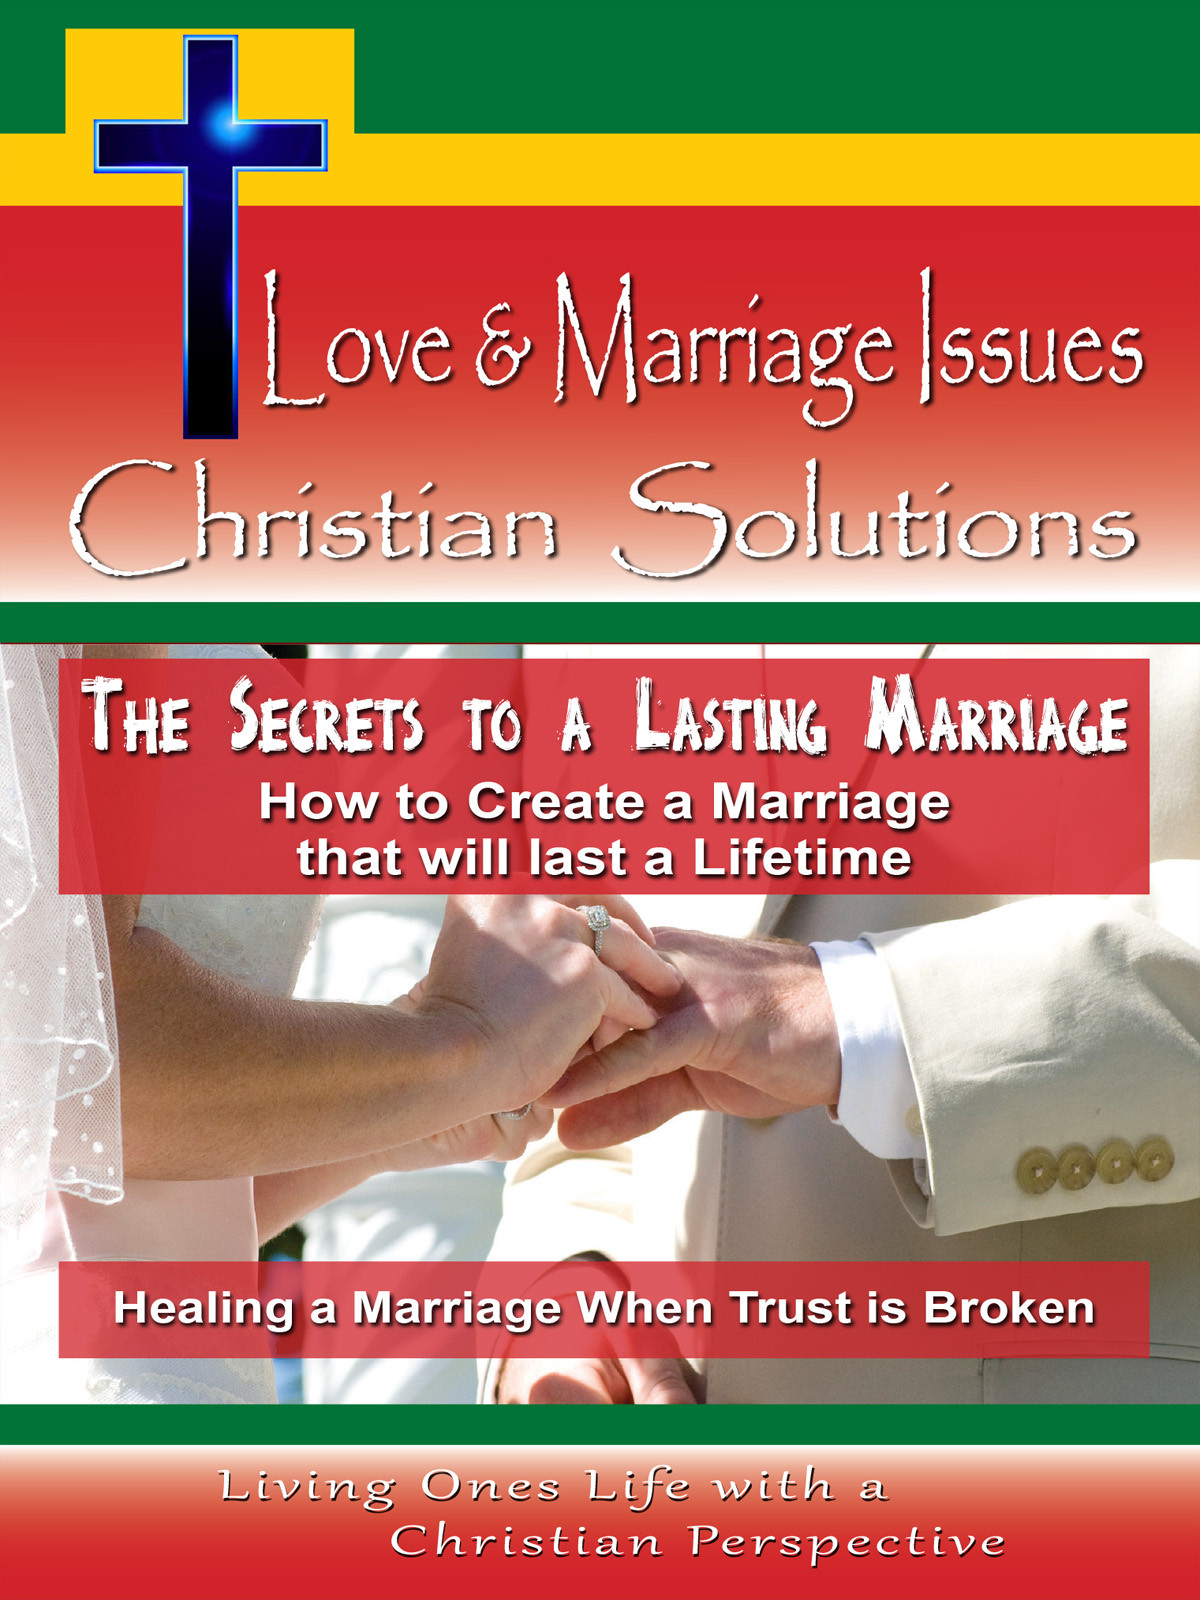 CH10044 - The Secrets to a Lasting Marriage How to Create a Marriage that will last a Lifetime